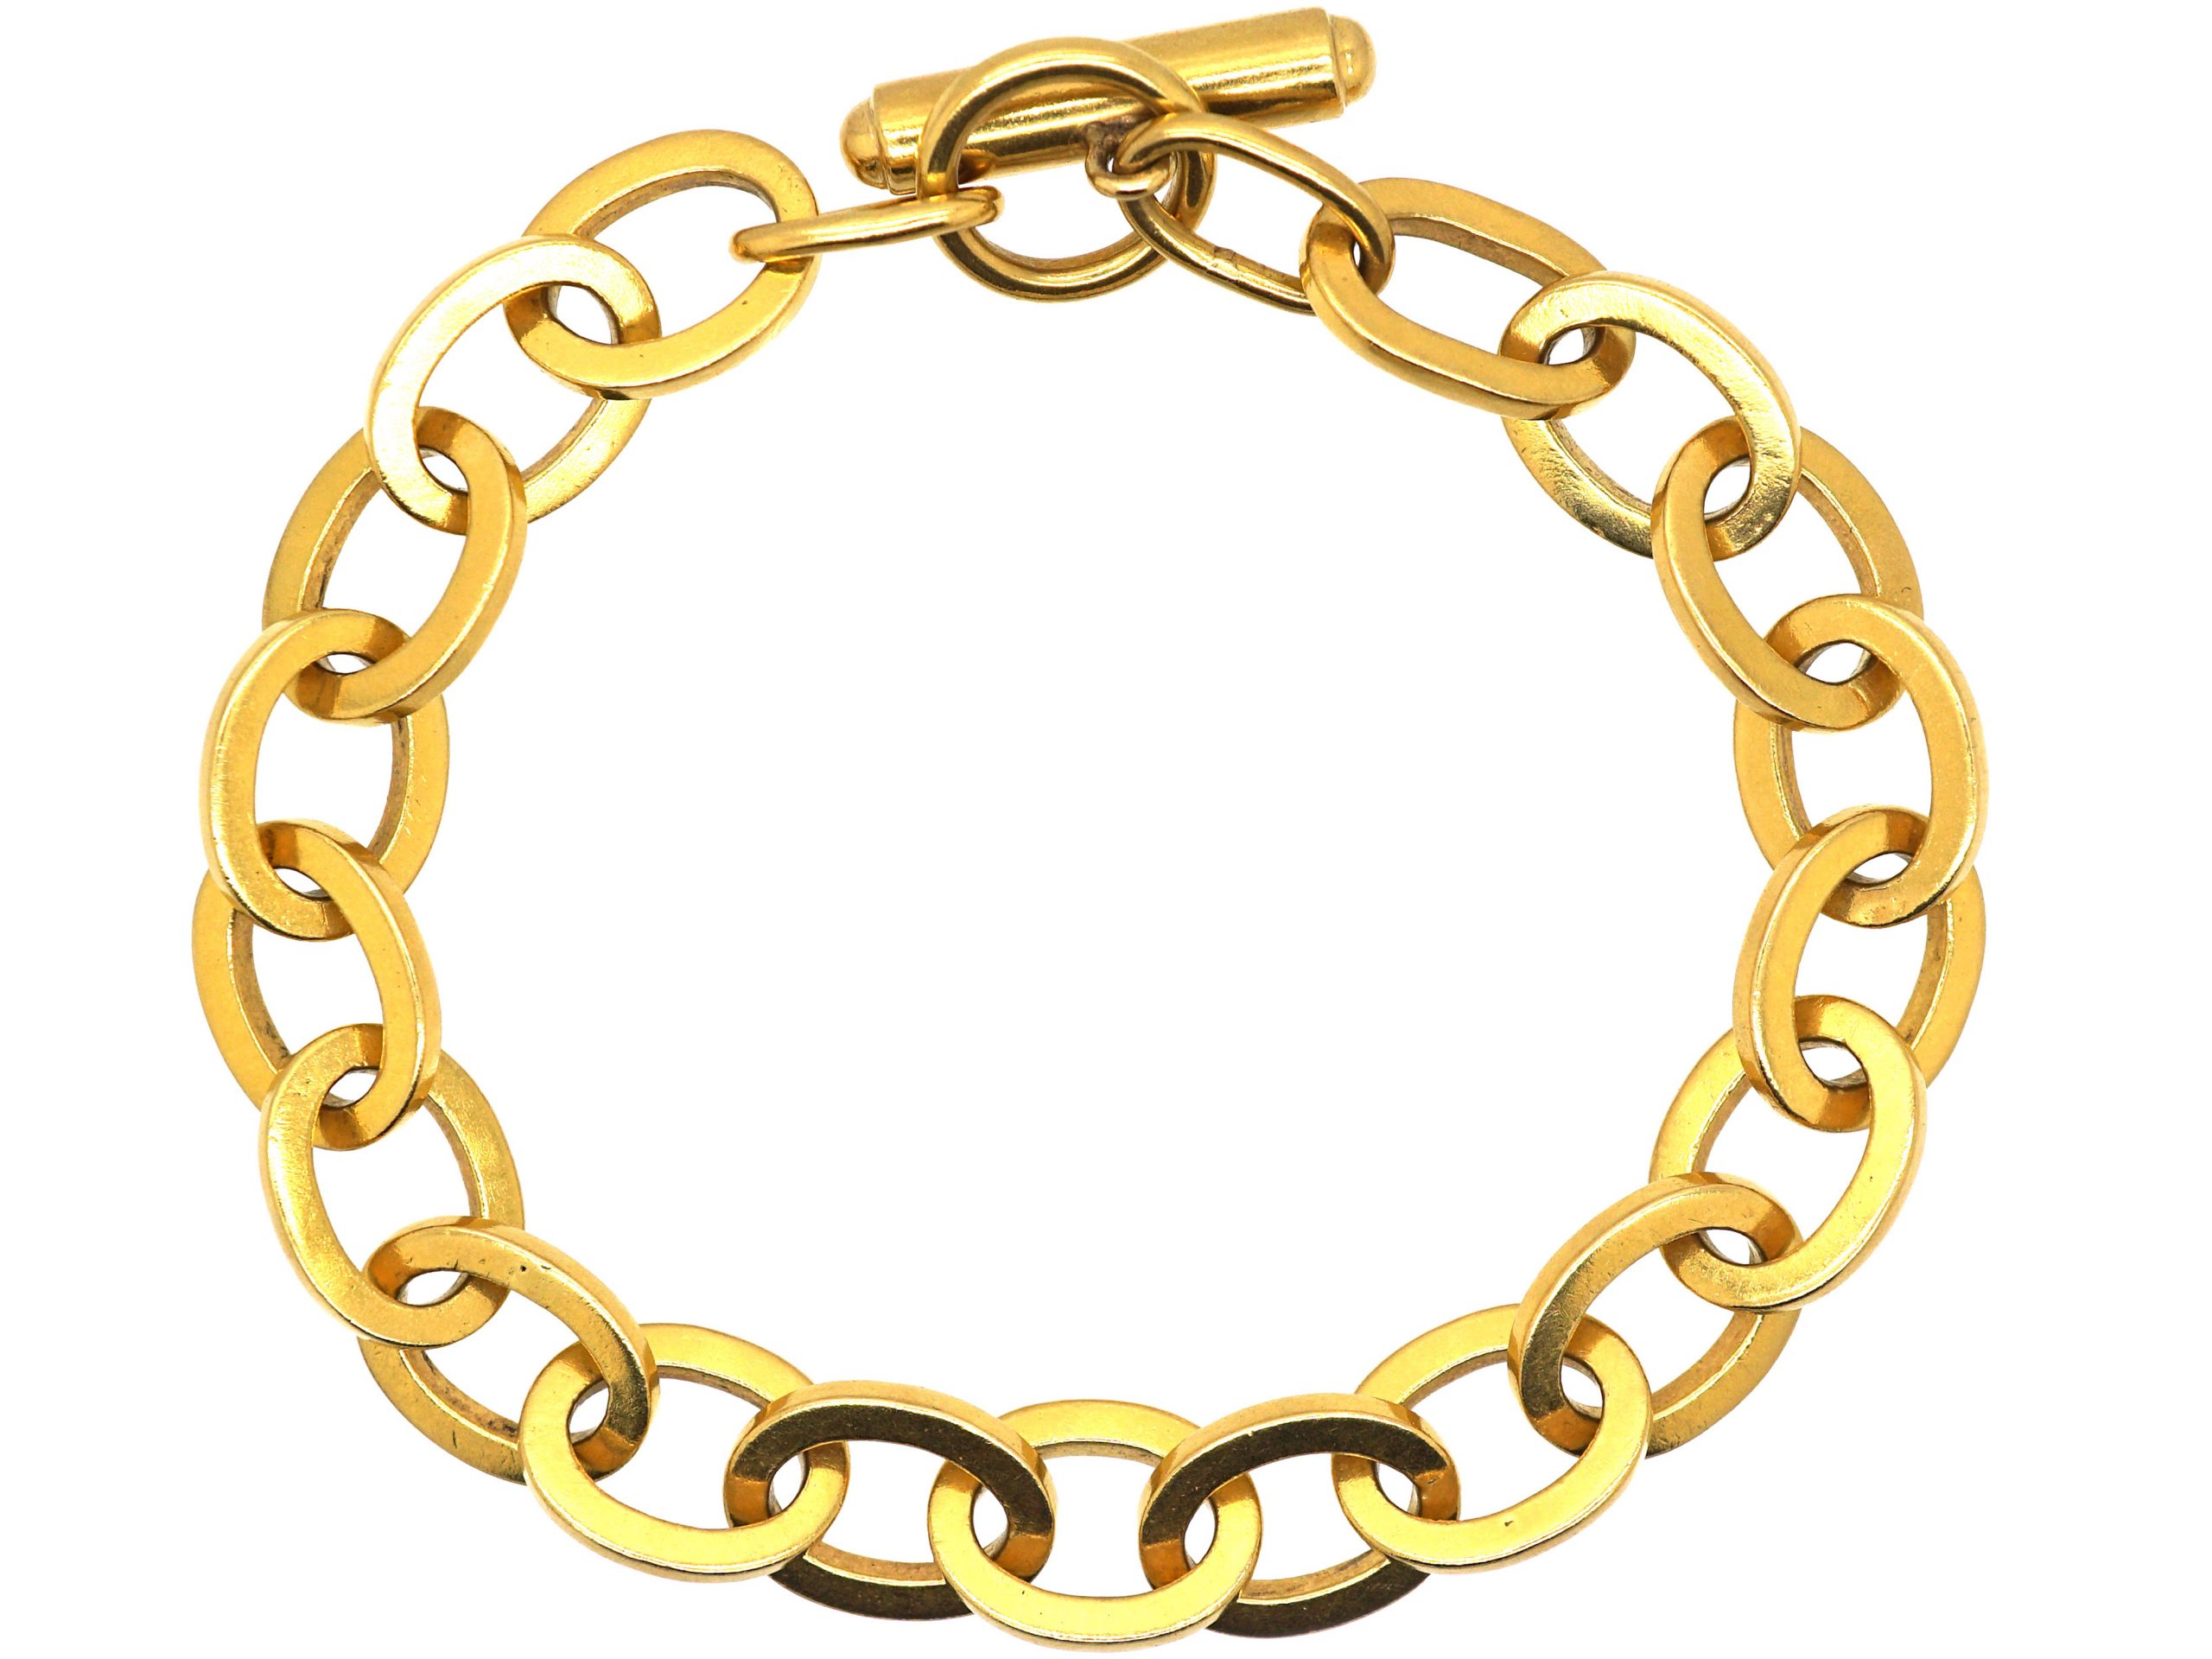 1970s 18ct Gold, Open Link Bracelet (888S) | The Antique Jewellery Company